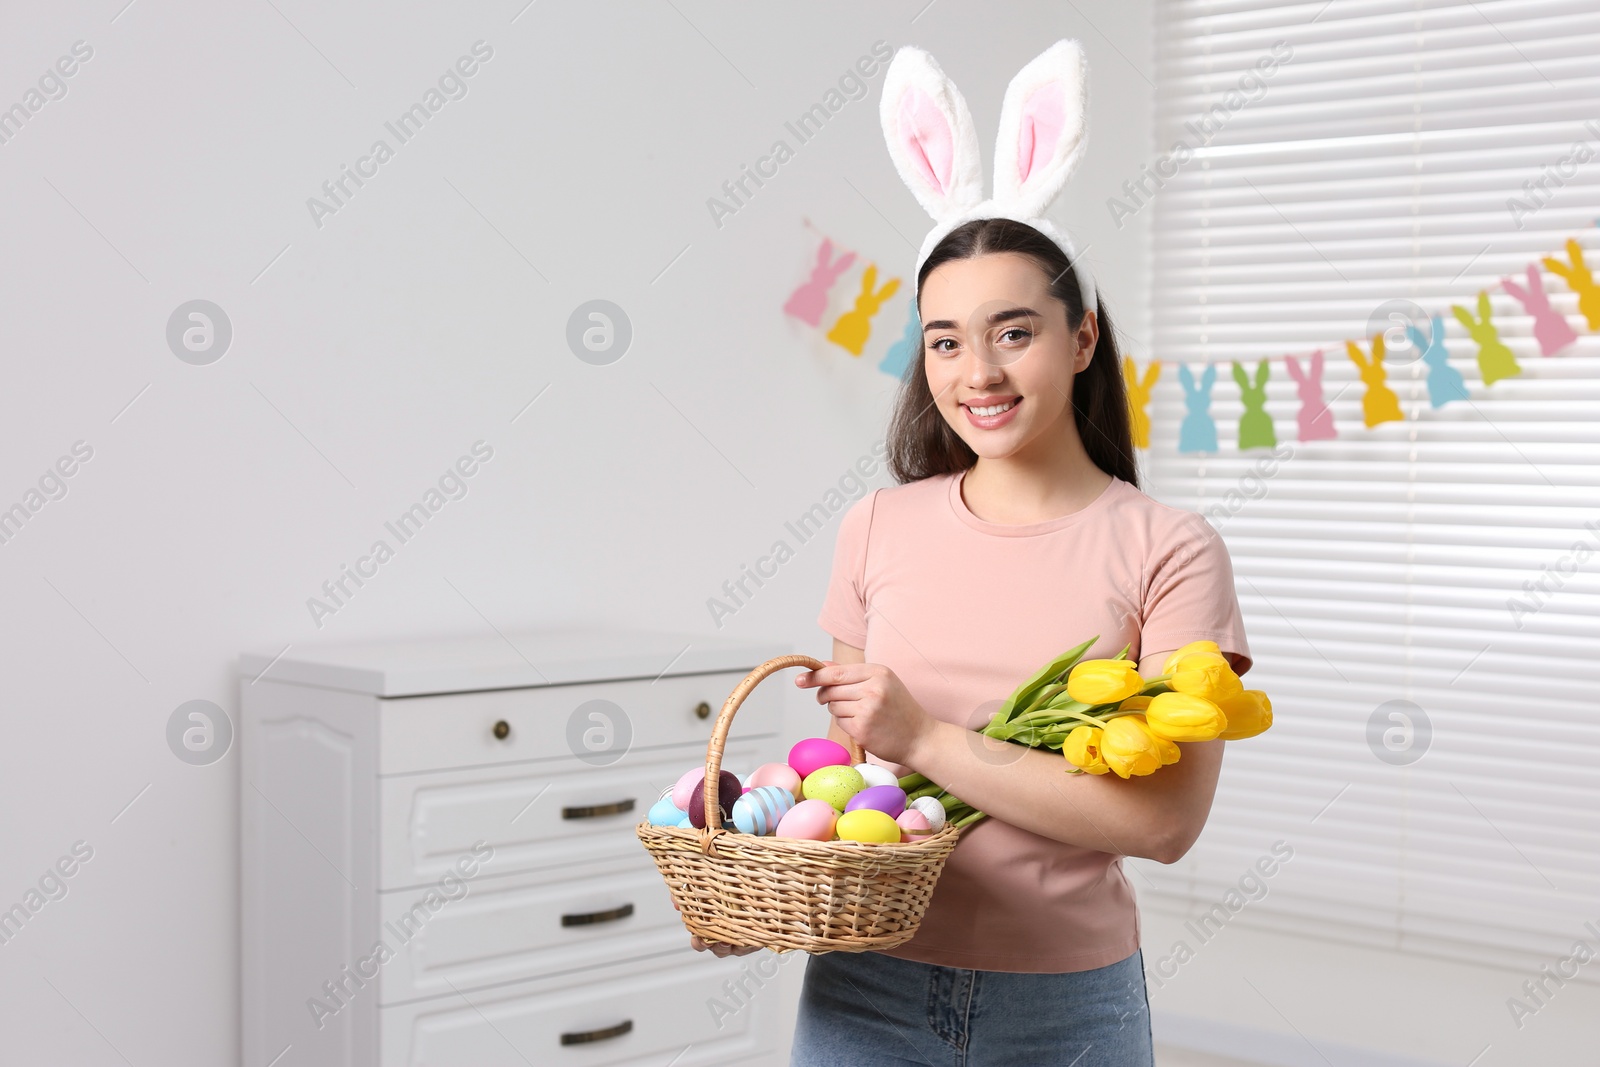 Photo of Happy woman in bunny ears headband holding wicker basket with painted Easter eggs and bouquet of flowers indoors. Space for text